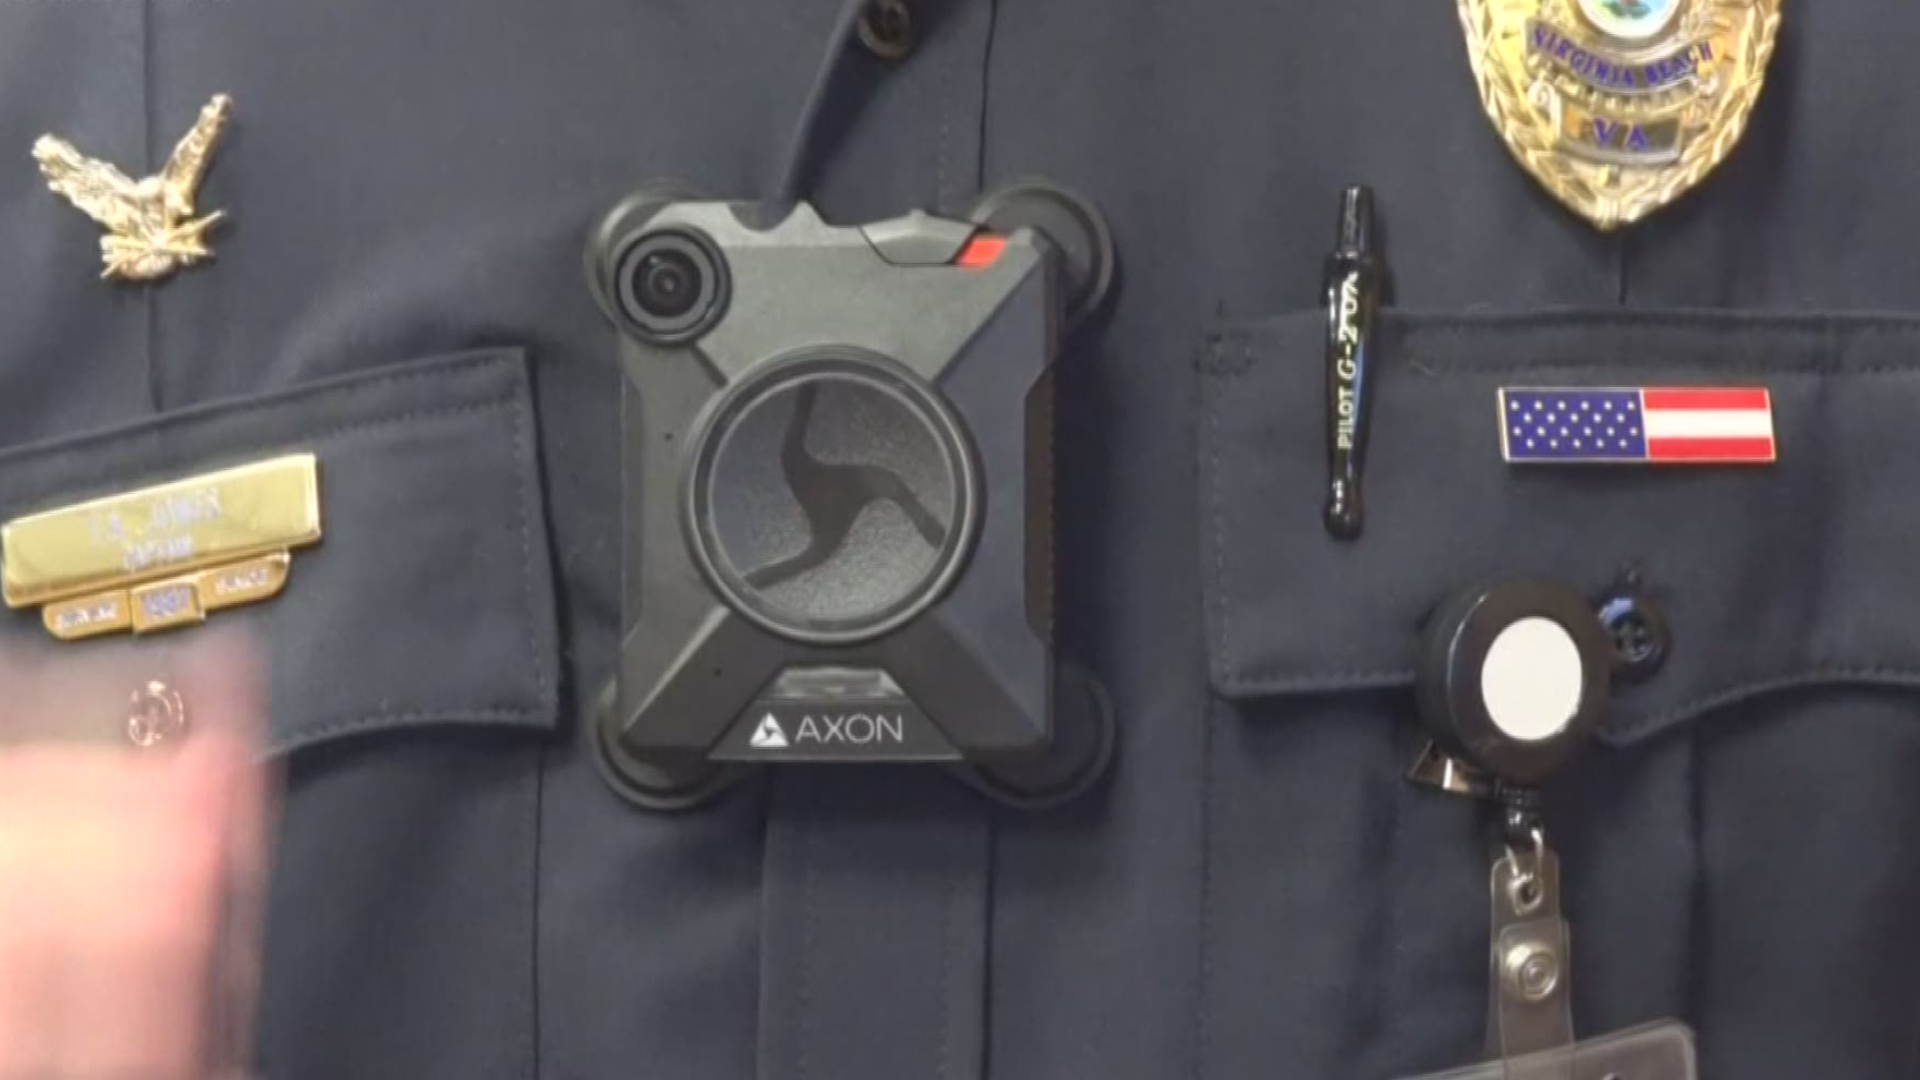 They're the last police department in Hampton Roads to get body cameras. The department plans on rolling out 450 cameras in the next 18 to 24 months.